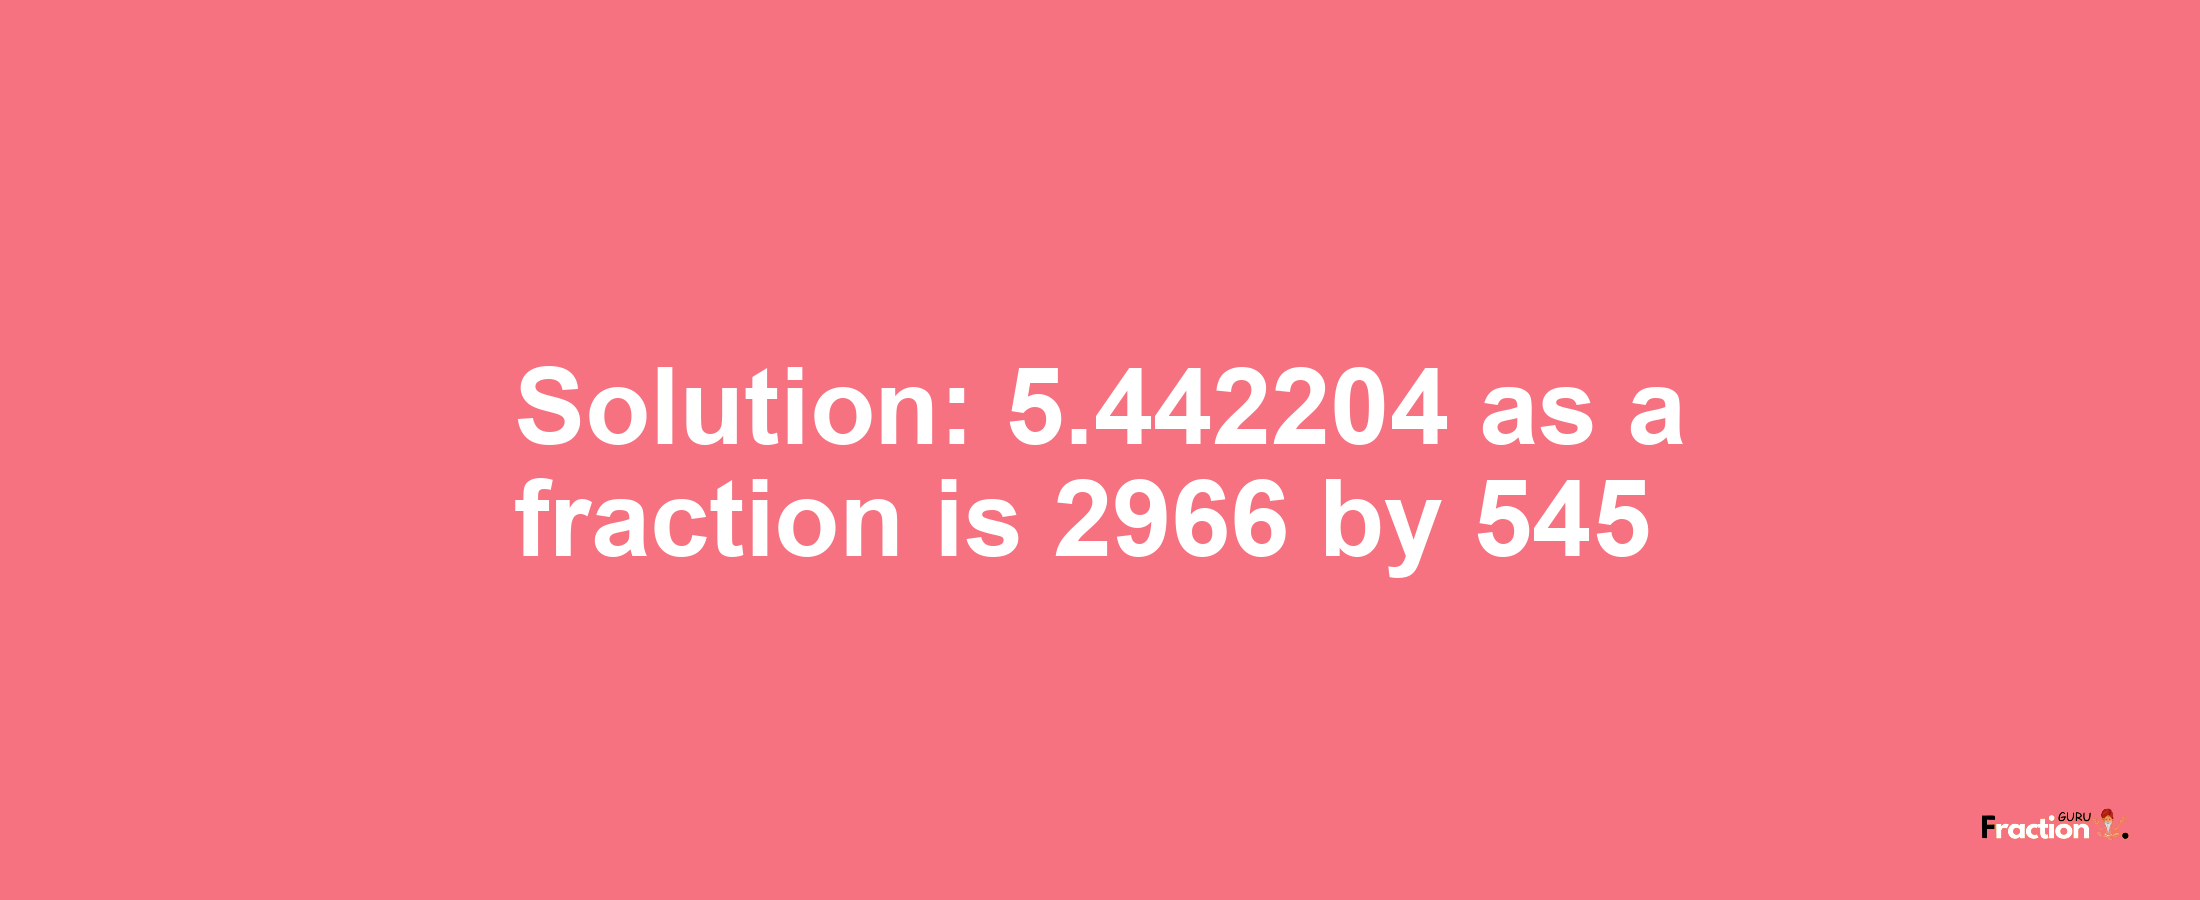 Solution:5.442204 as a fraction is 2966/545